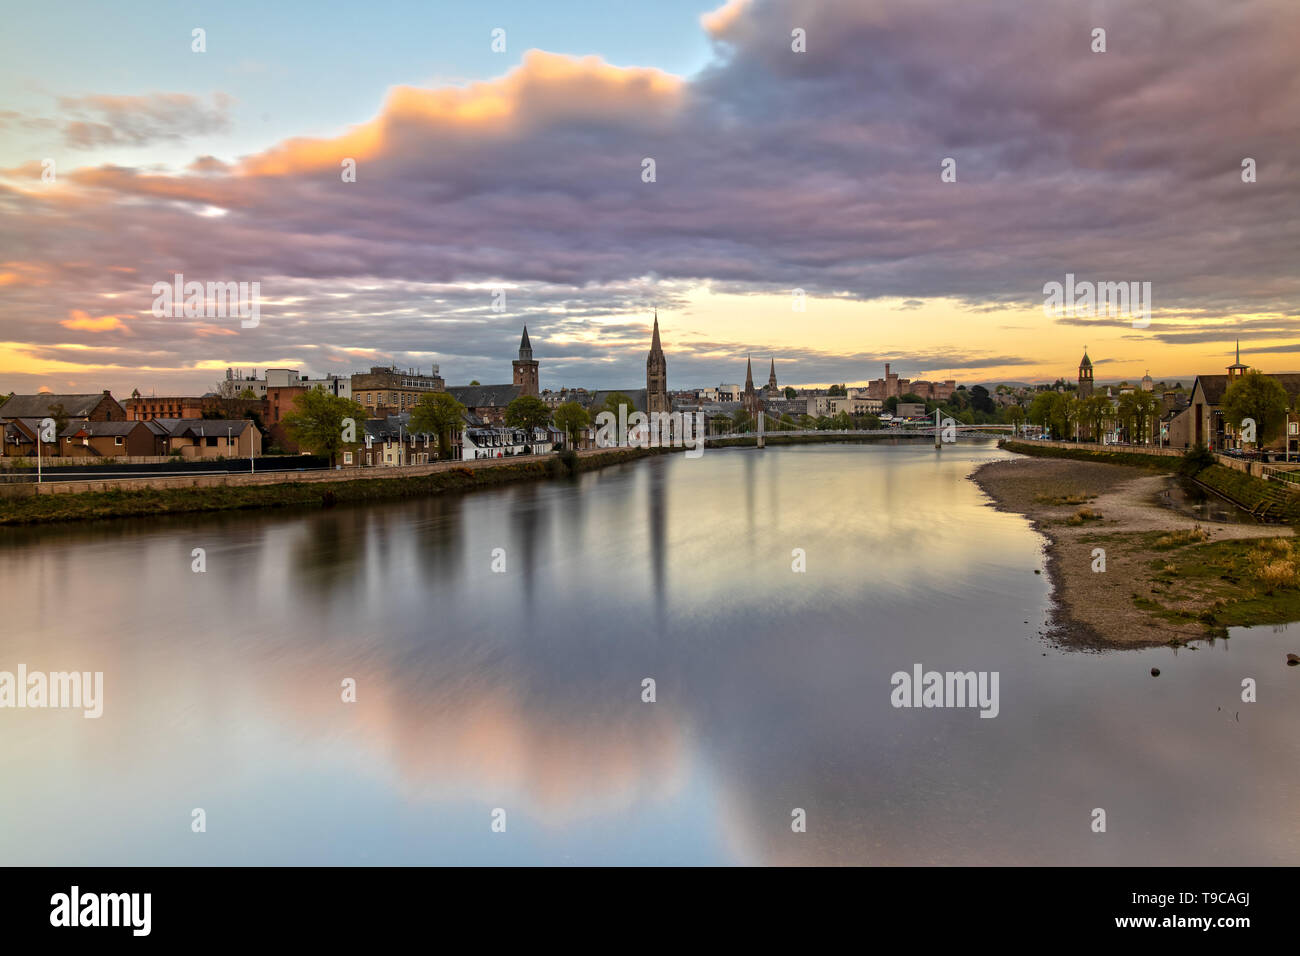 Impression of Inverness and the Greig Street Bridge in Scotland at Sunset Stock Photo